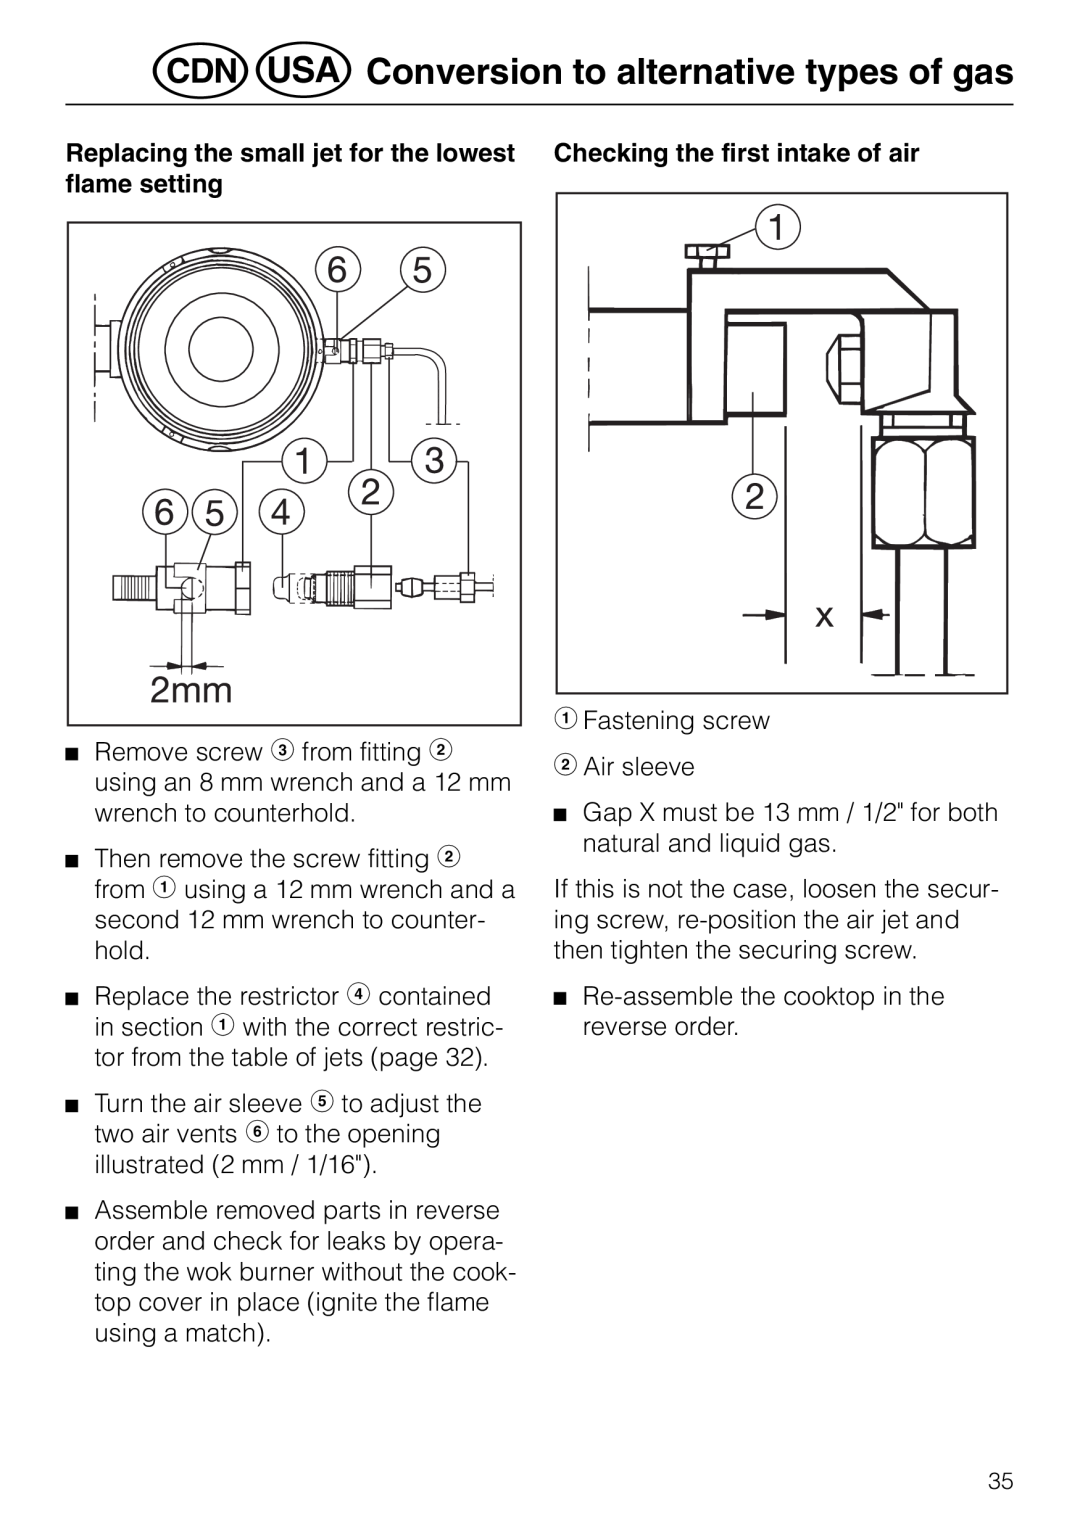 Miele KM 81-2 operating instructions öConversion to alternative types of gas, bFastening screw cAir sleeve 